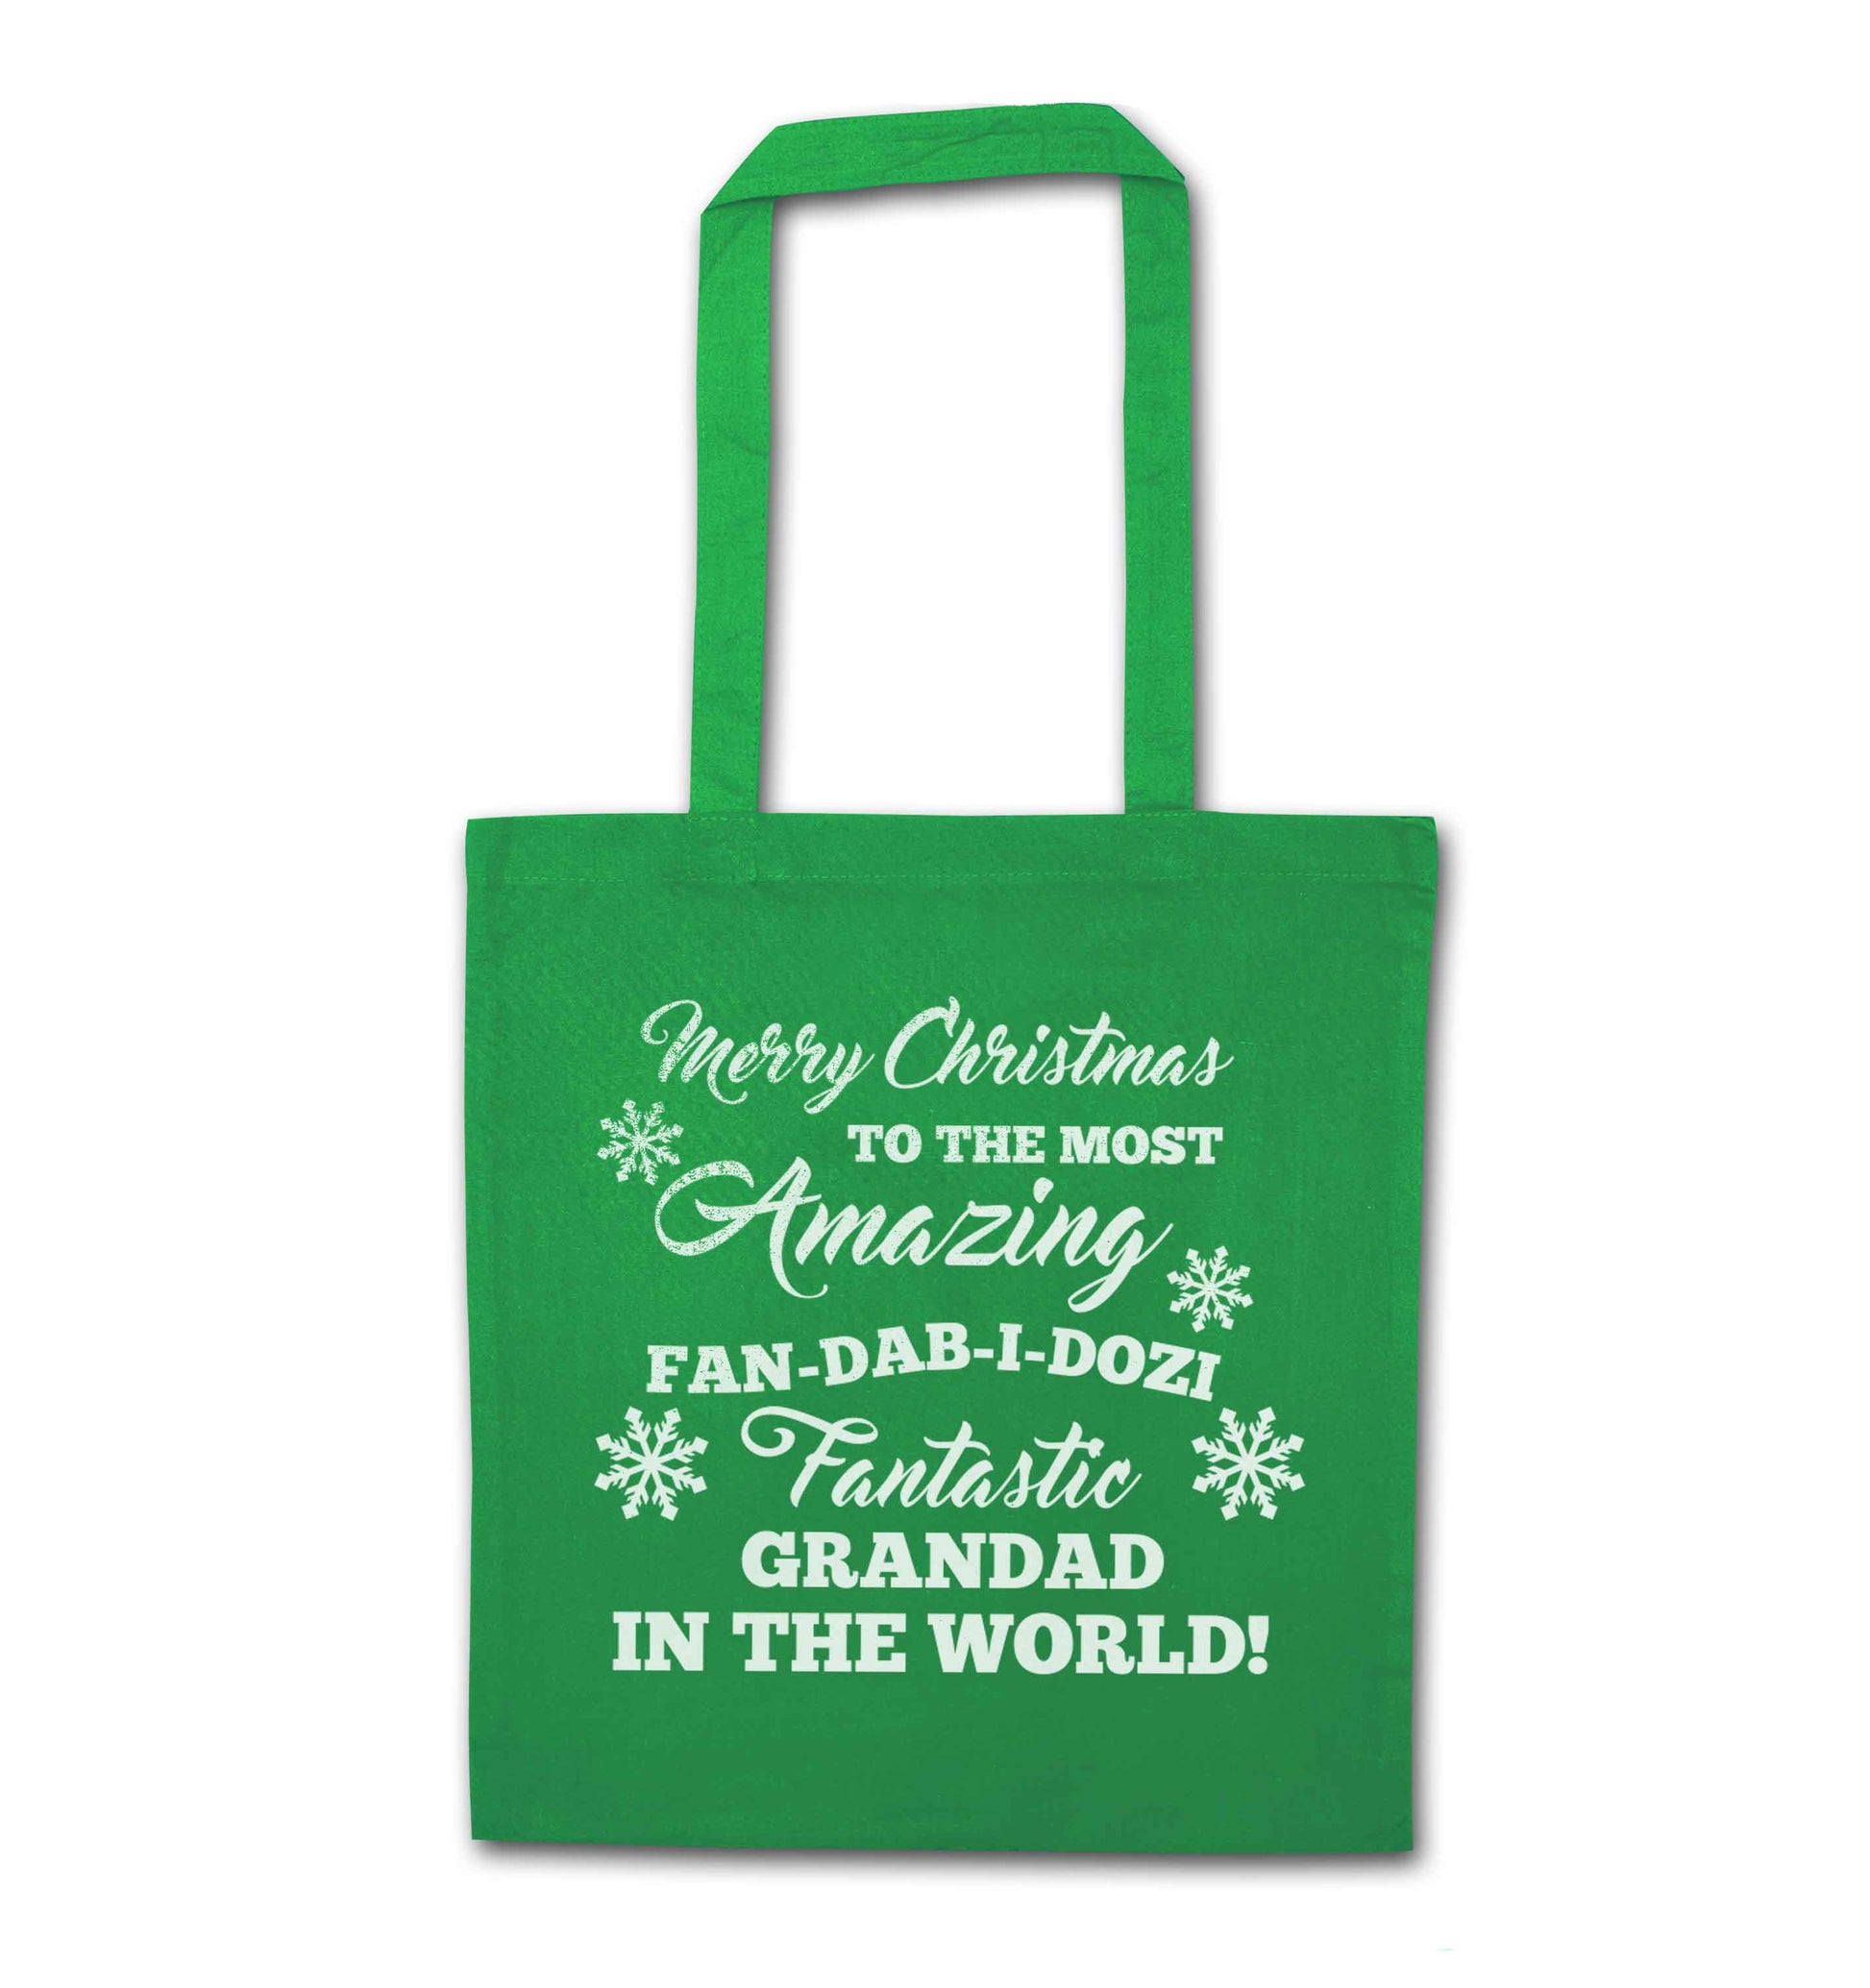 Merry Christmas to the most amazing fan-dab-i-dozi fantasic Grandad in the world green tote bag